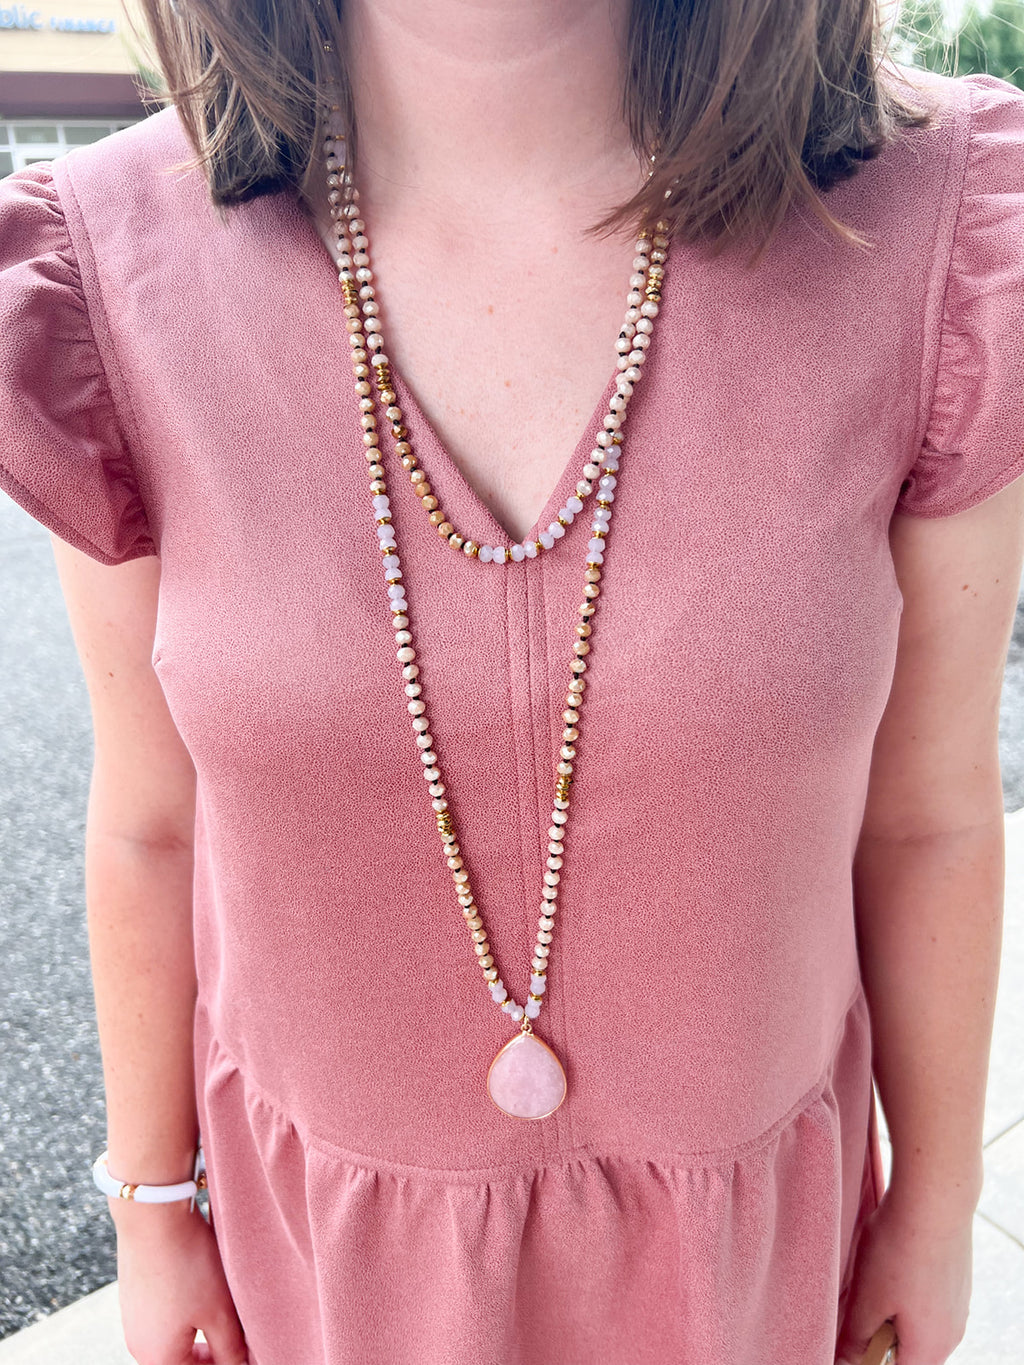 Long Beaded Wrap Necklace with Stone Drop Pendant-Pink